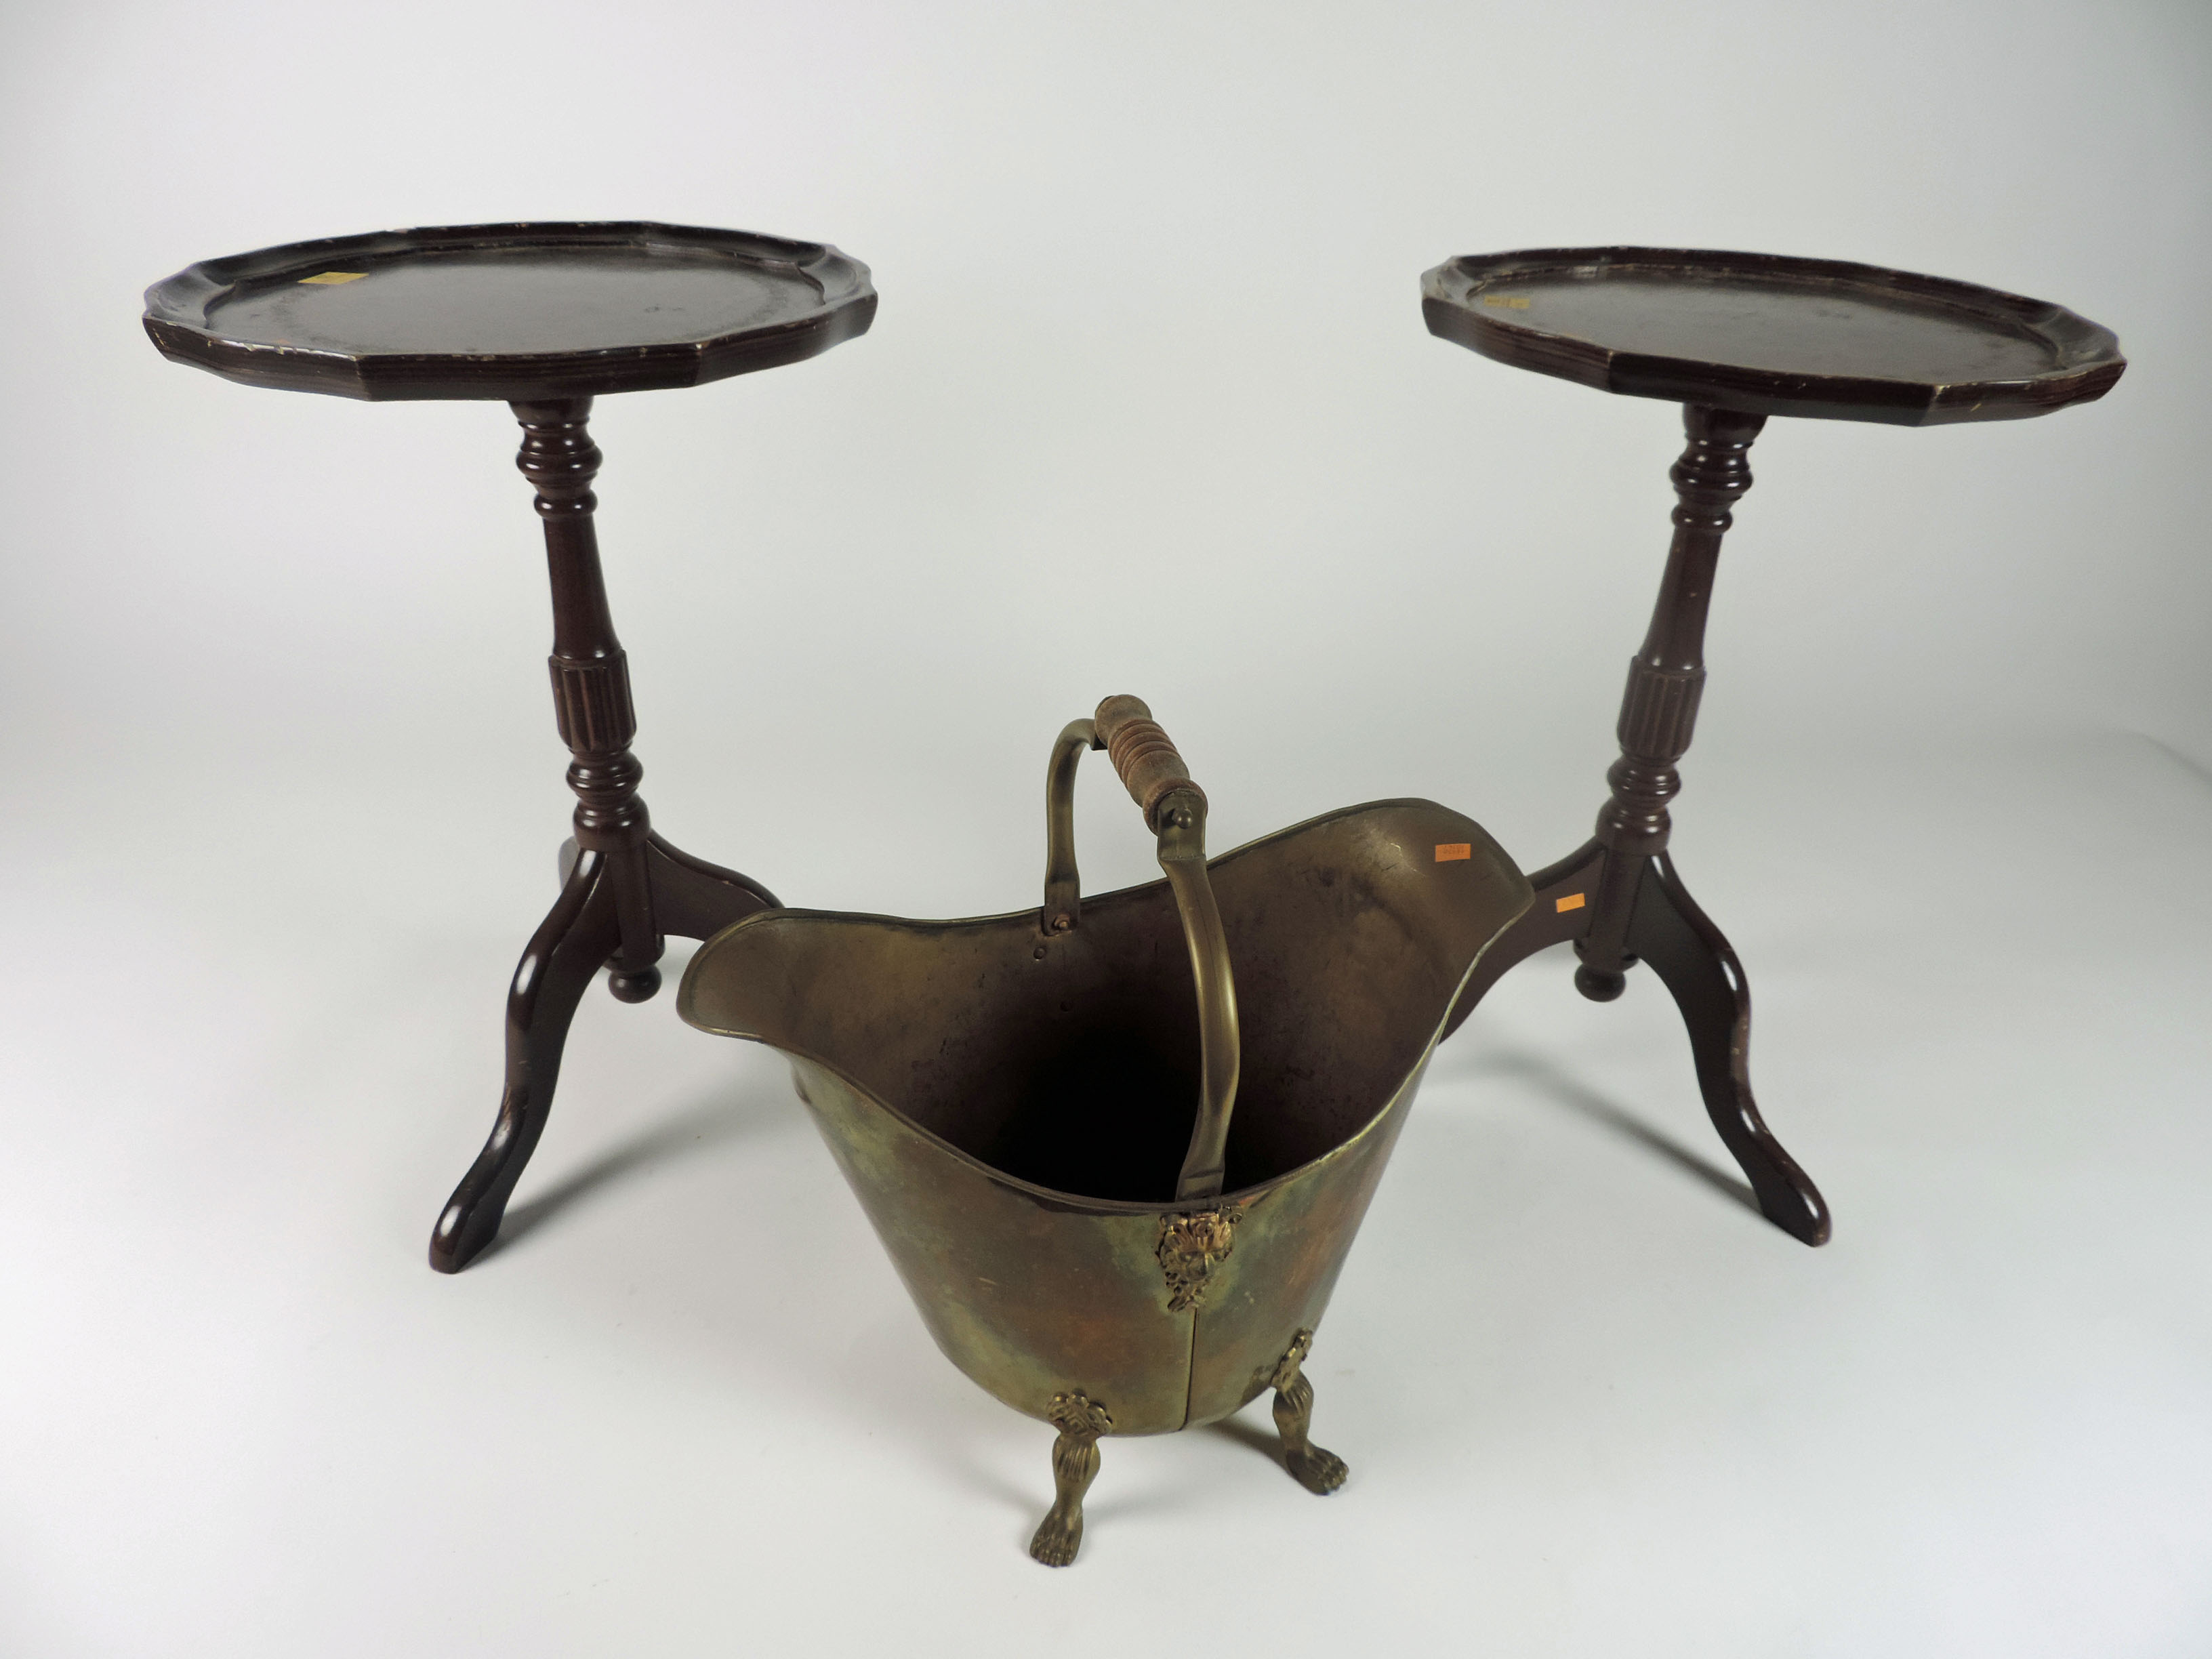 A brass Coal Box, and lid, a brass Coal Helmet, a brass Fire-tidy, and two small wooden Wine Tables.